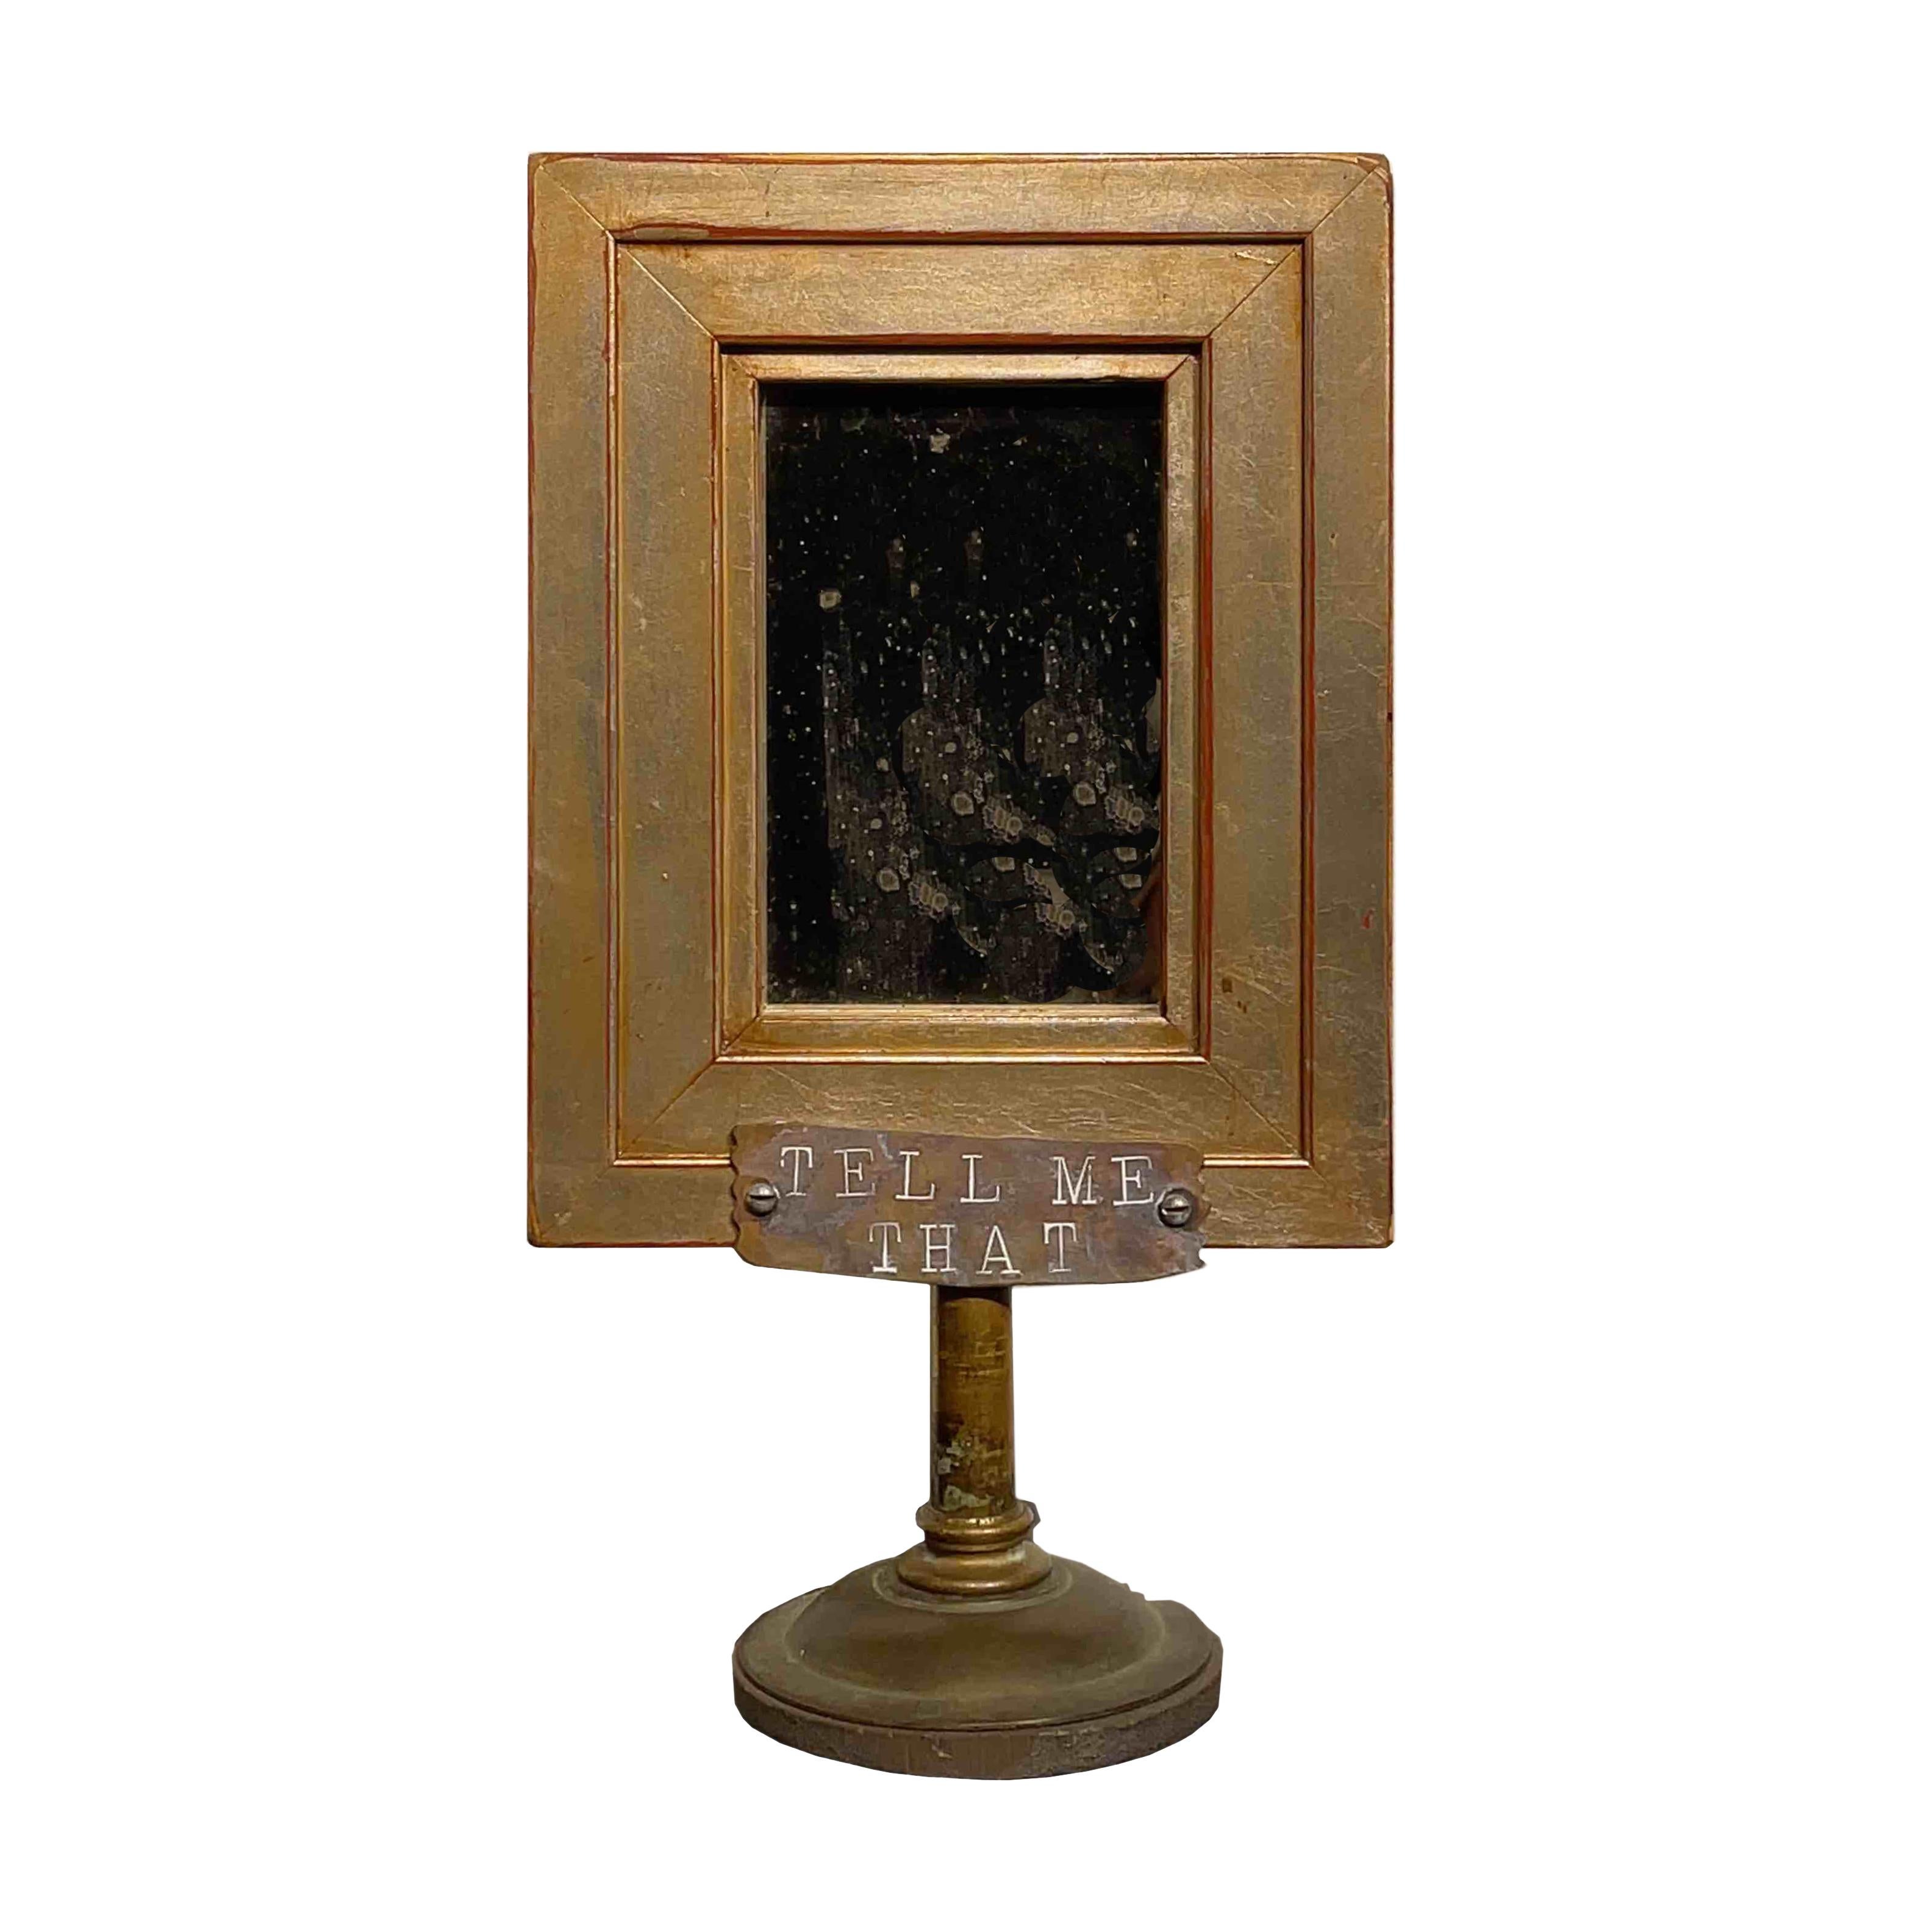 Self-taught artist John Seubert, AKA John Dolly, uses objects he uncovers as he rehabs older homes in Chicago. This piece has two handmade frames mounted back to back. Each side is a different treasure to discover. The front is a smoked mirror and